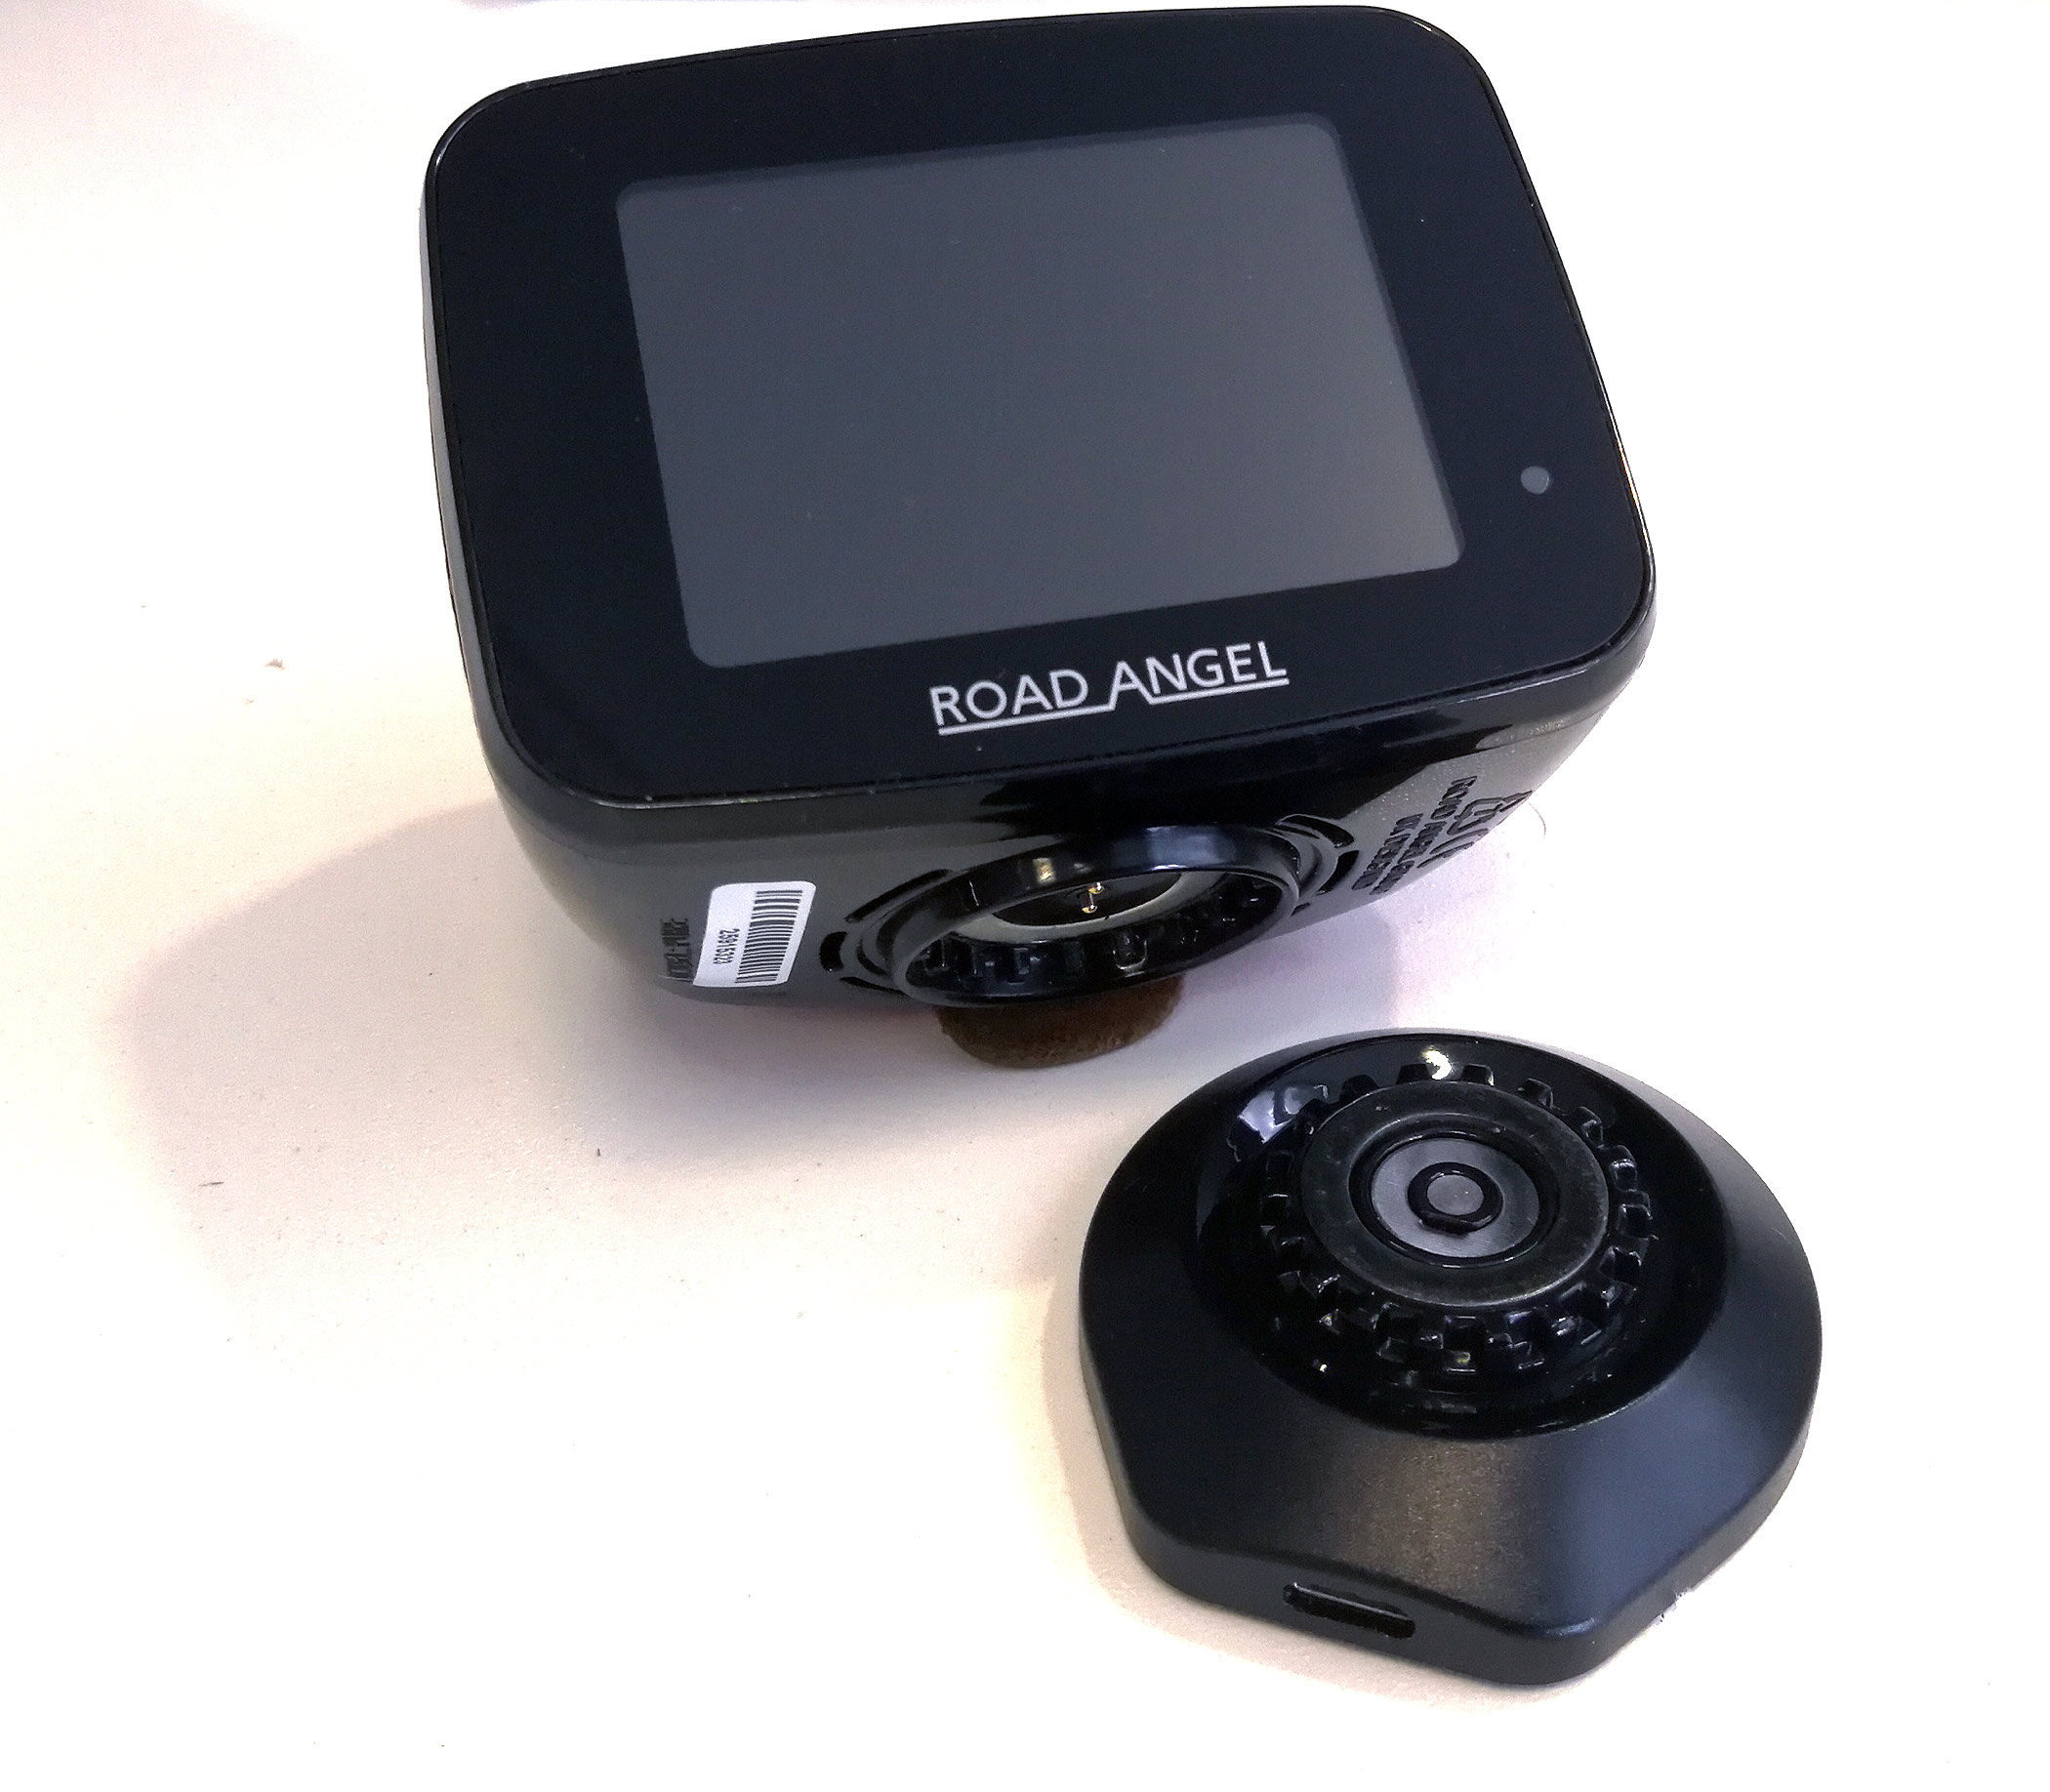 Road Angel Pure Speed camera detector road saftey device with laser detector 